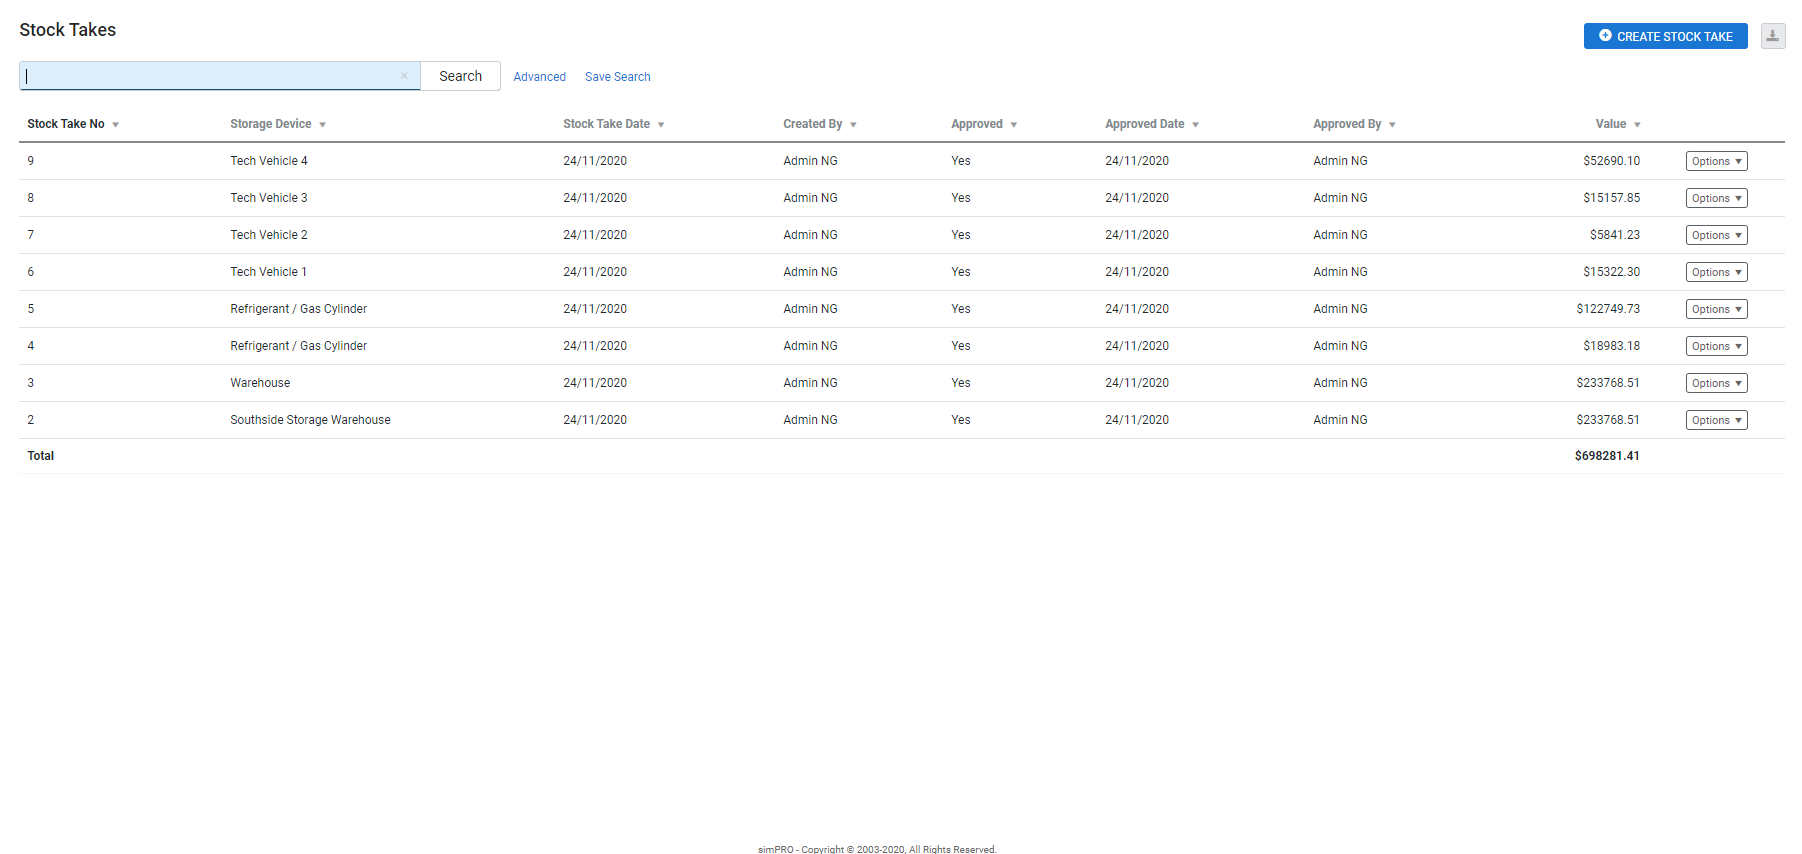 A screenshot of the Stock Takes page.